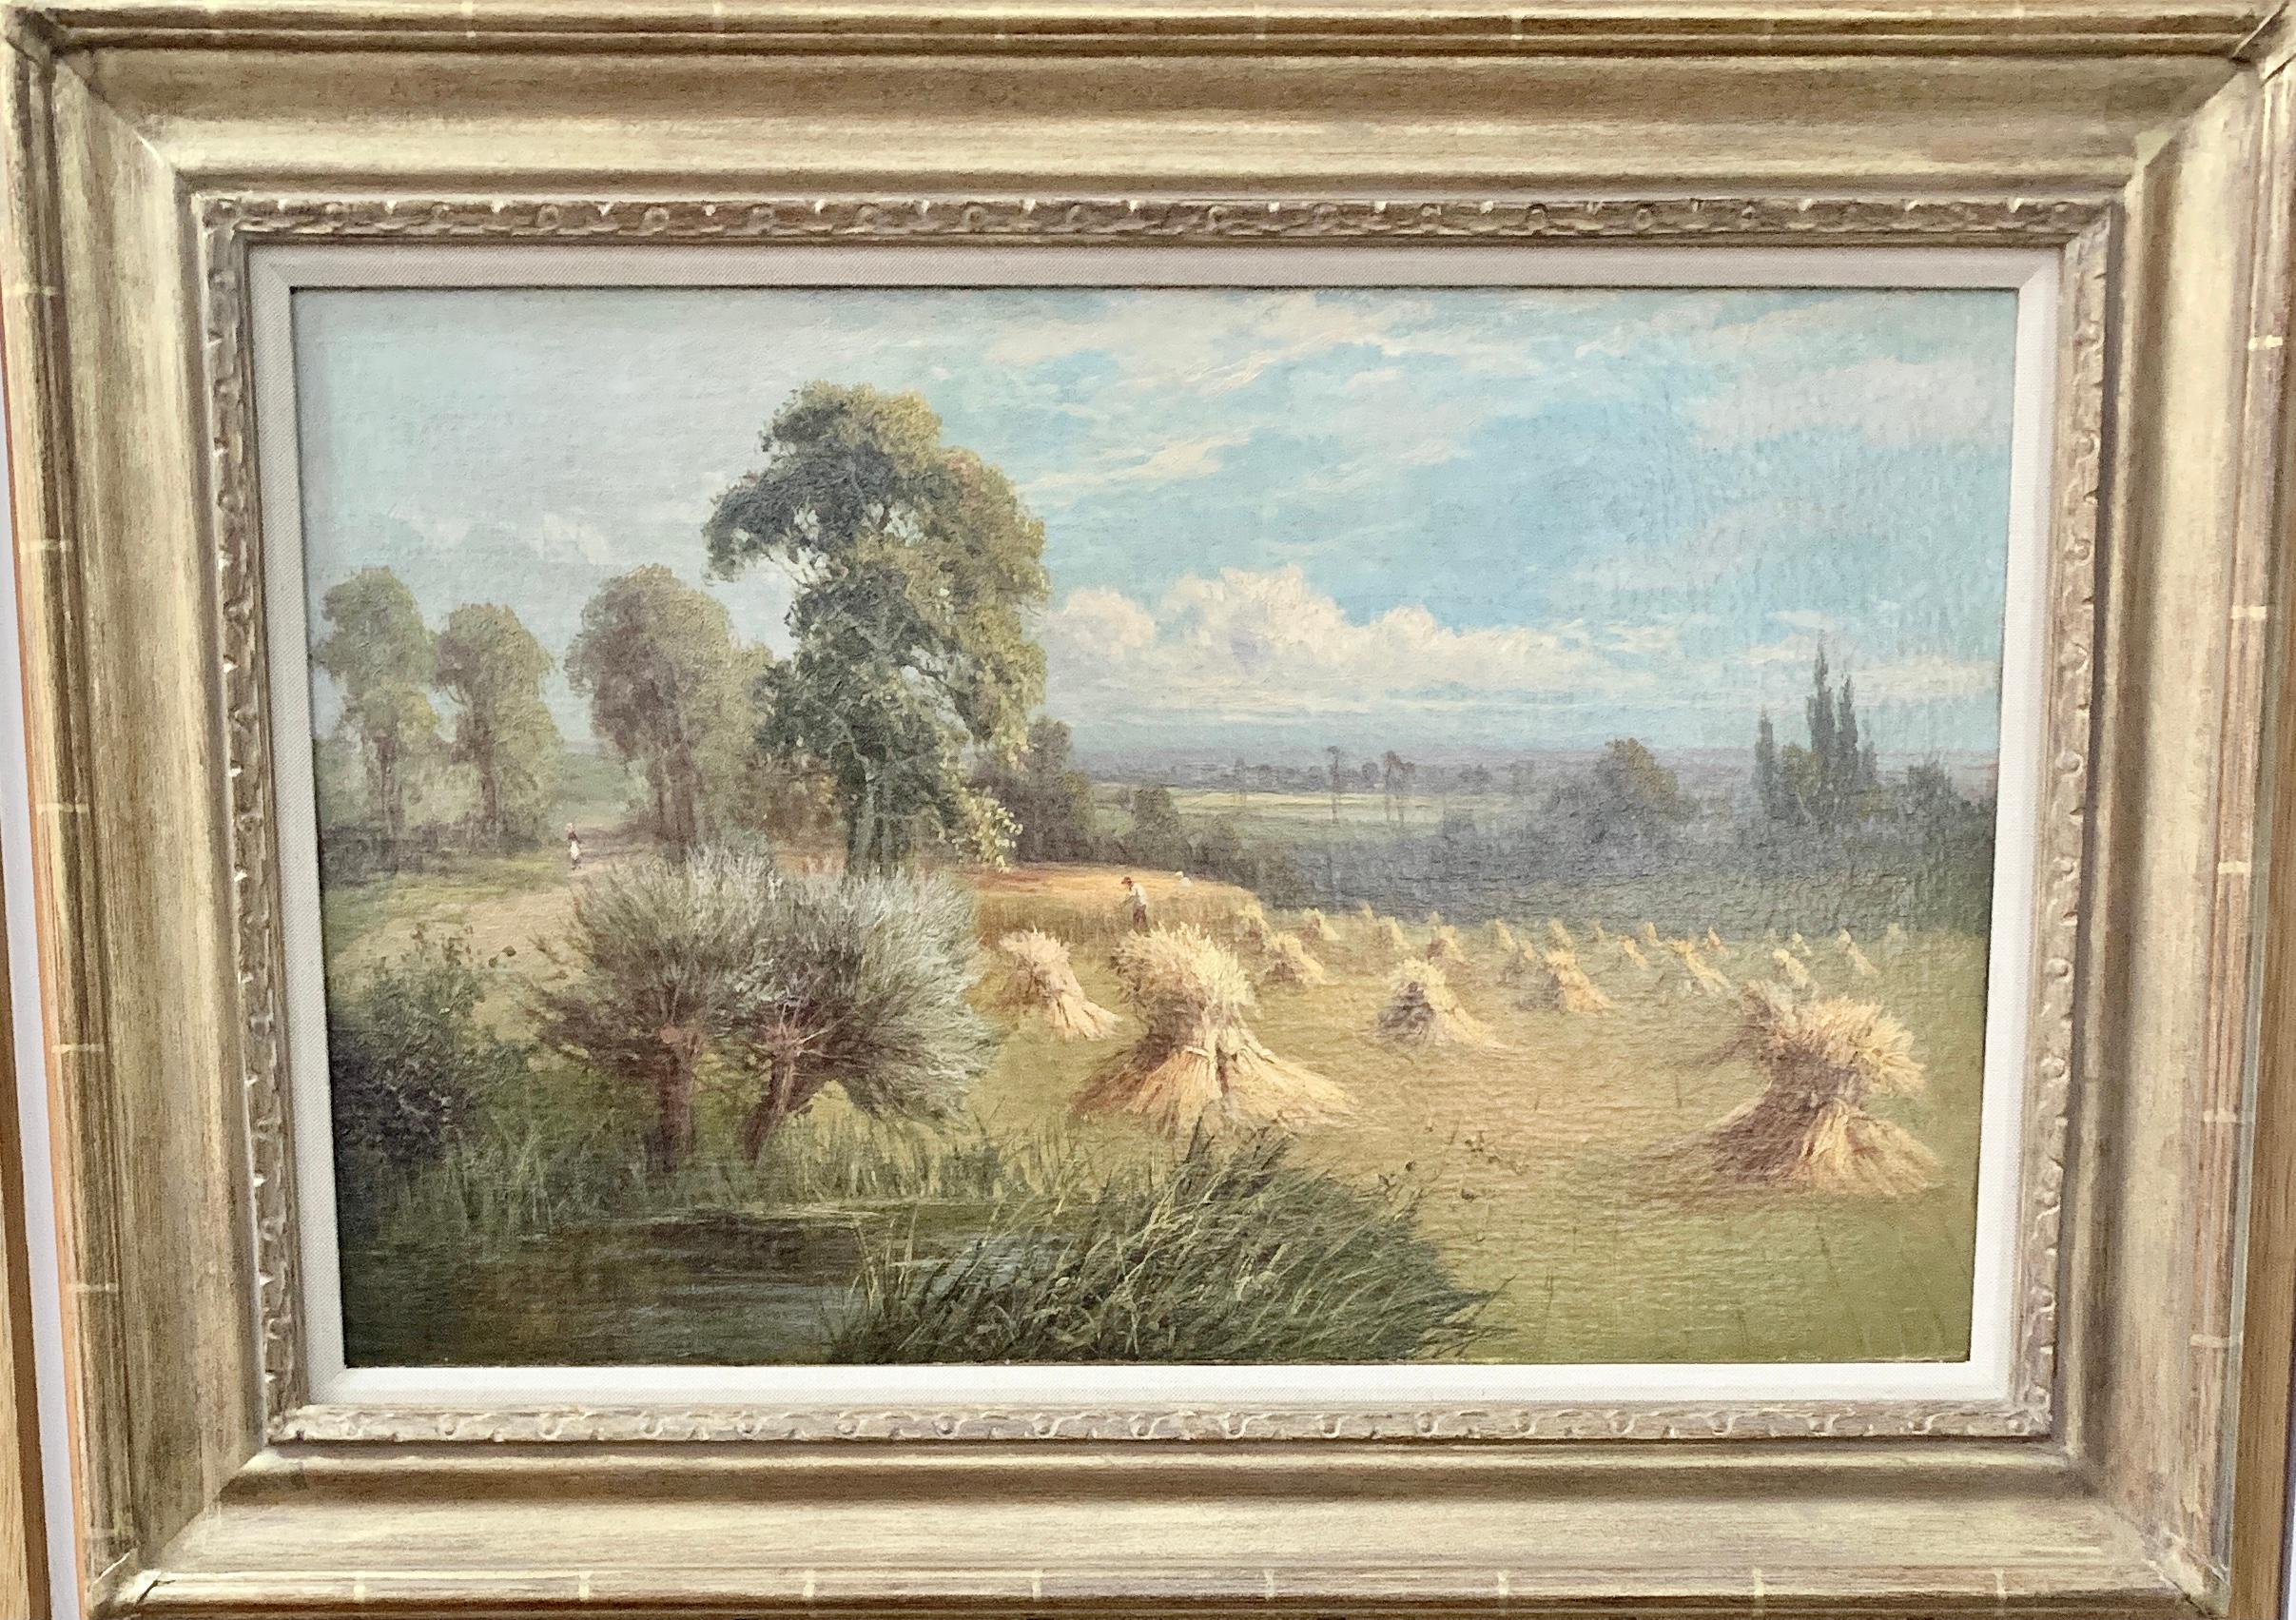 English 19th century landscape with farmers harvesting the hay, pond and Willow.